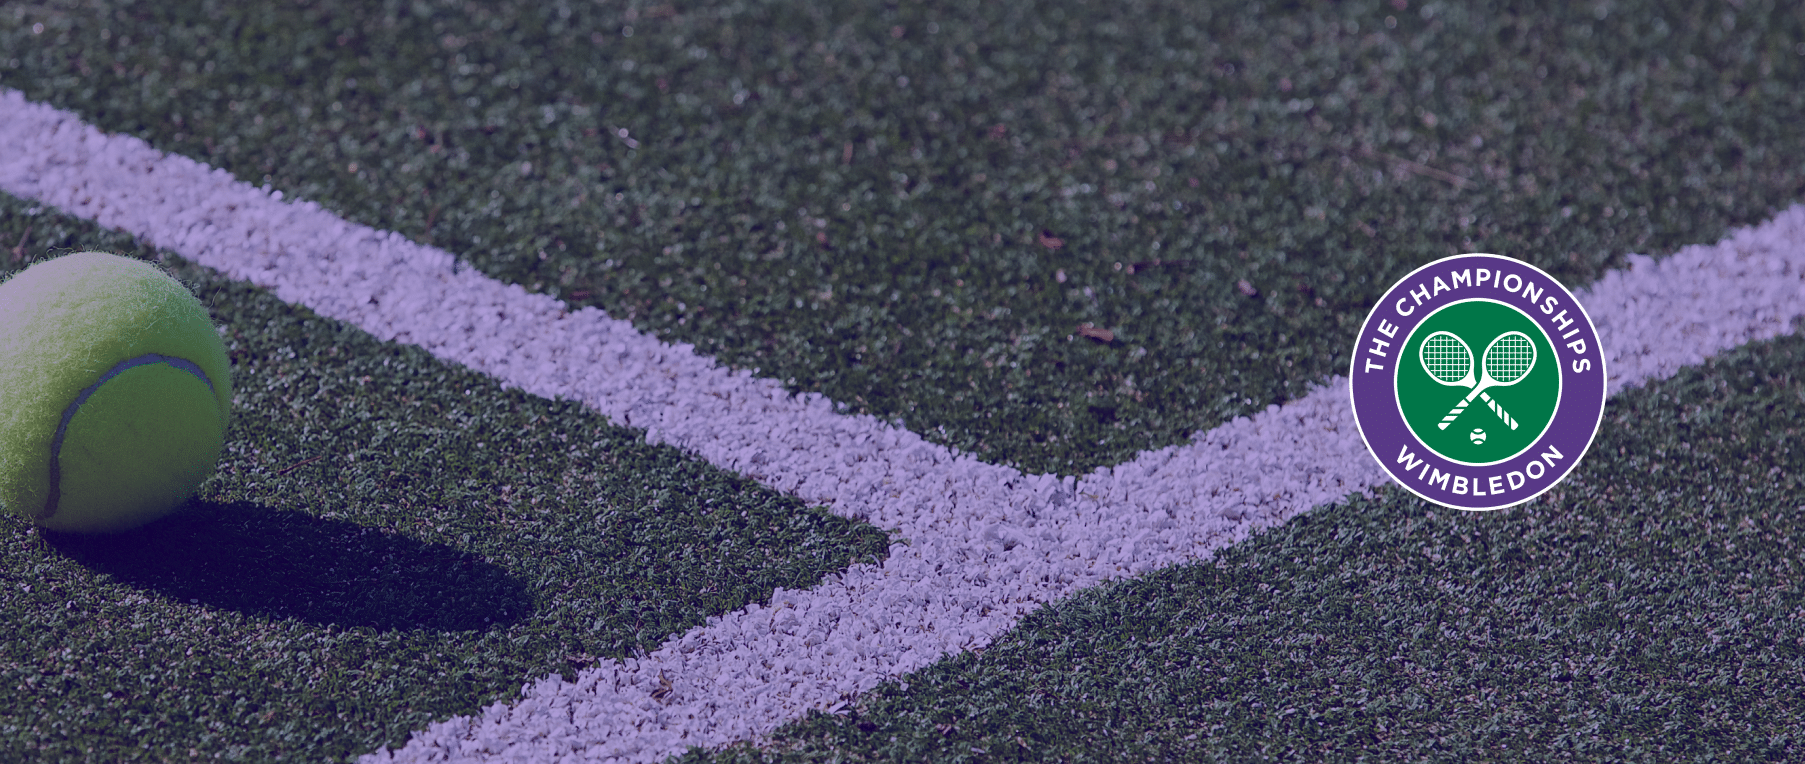 an image of a tennis court with a ball and the Wimbledon logo